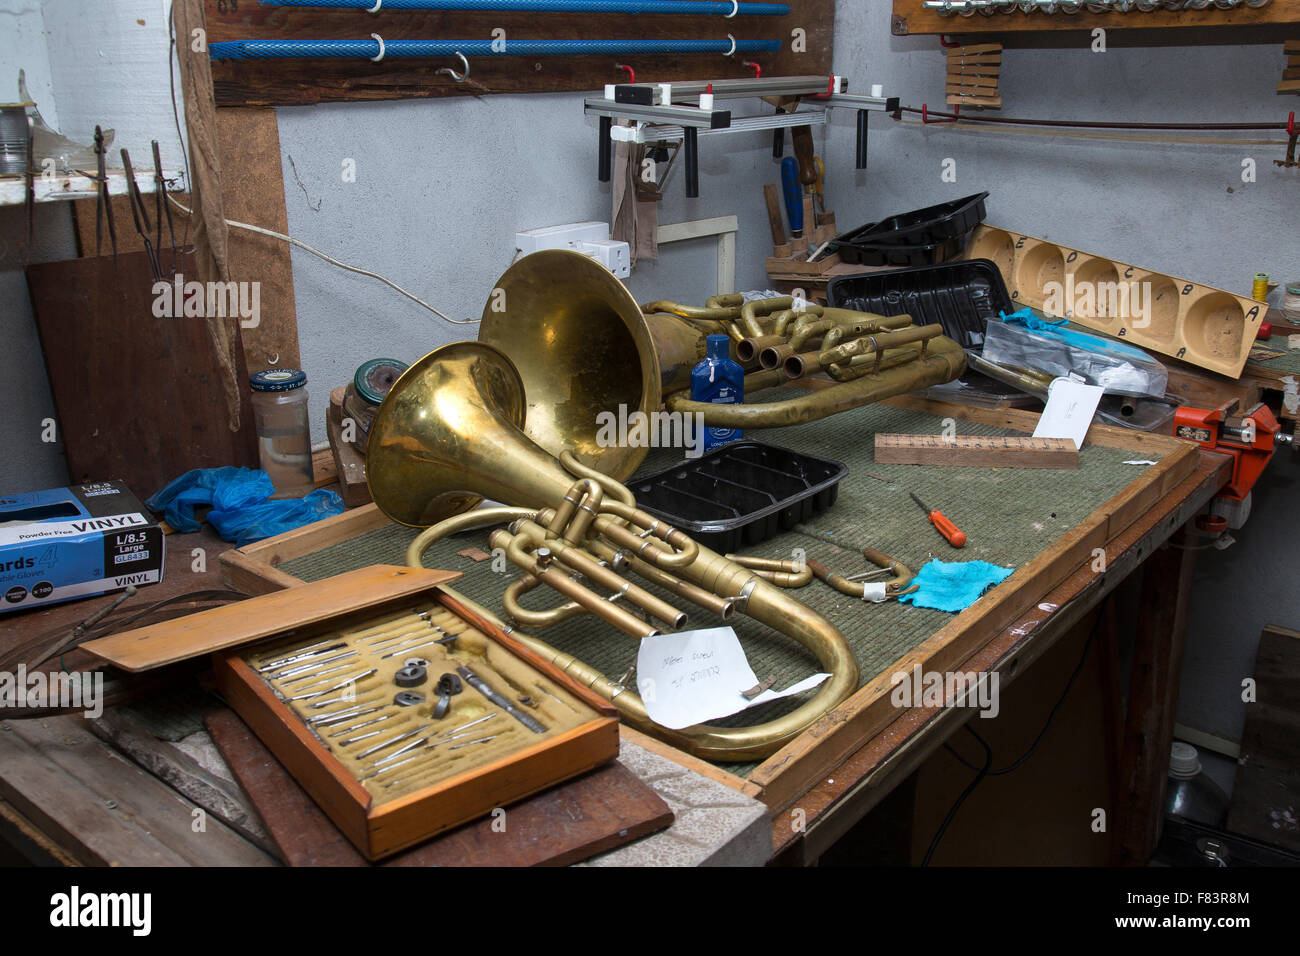 Workbench and tools for musical instrument repair. Stock Photo